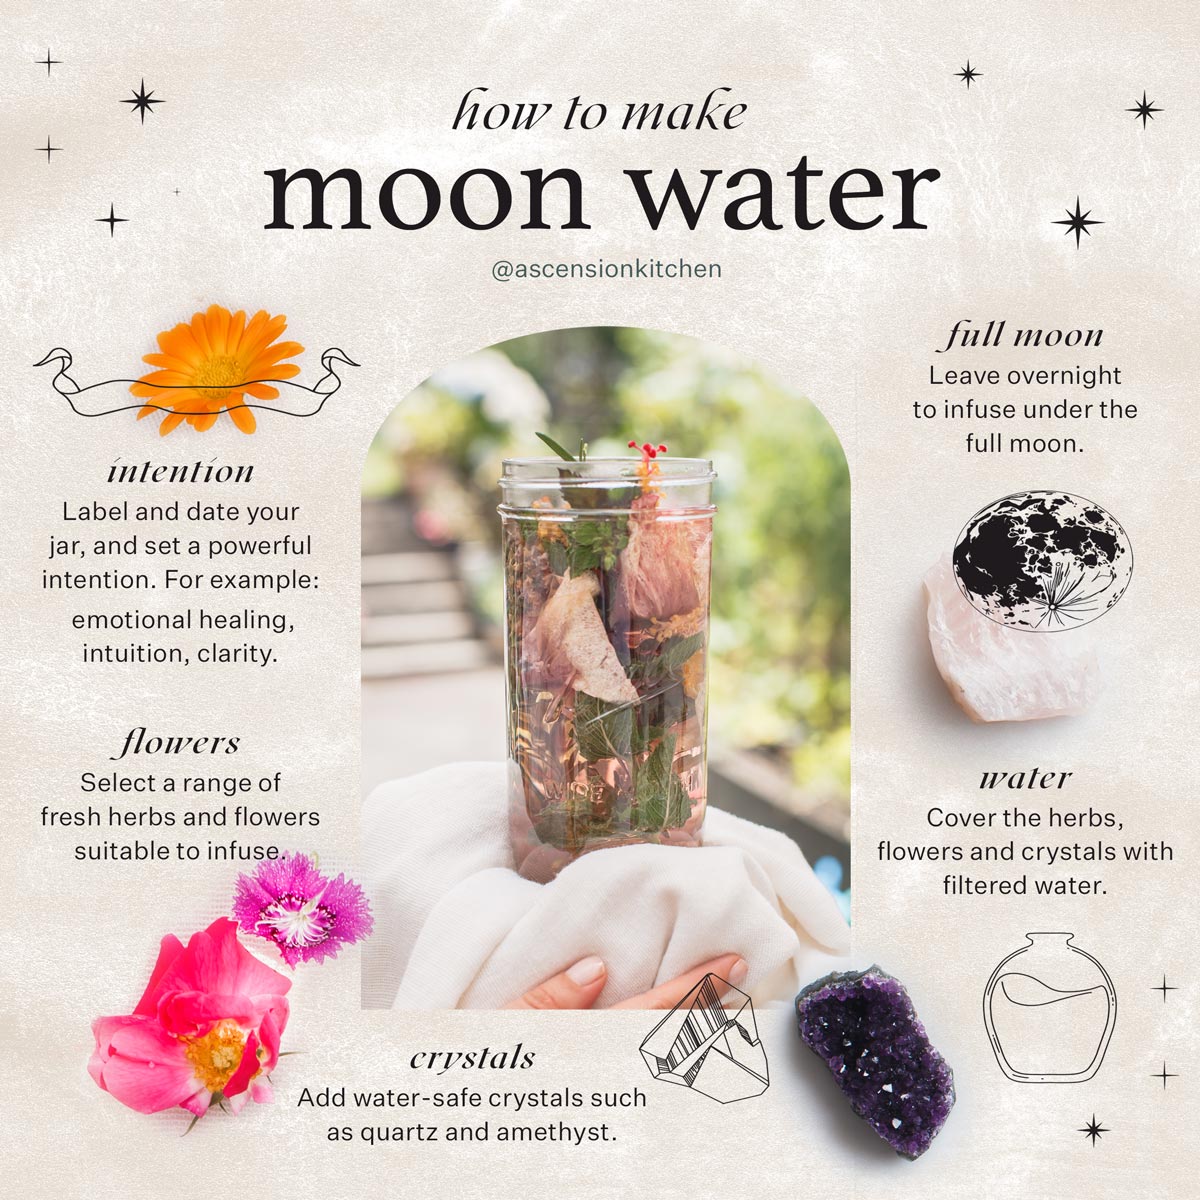 An infographic explaining how to make moon water. There is a picture of moon water in the centre, surrounded by the various steps required. The text "How to make moon water" is written over the top.